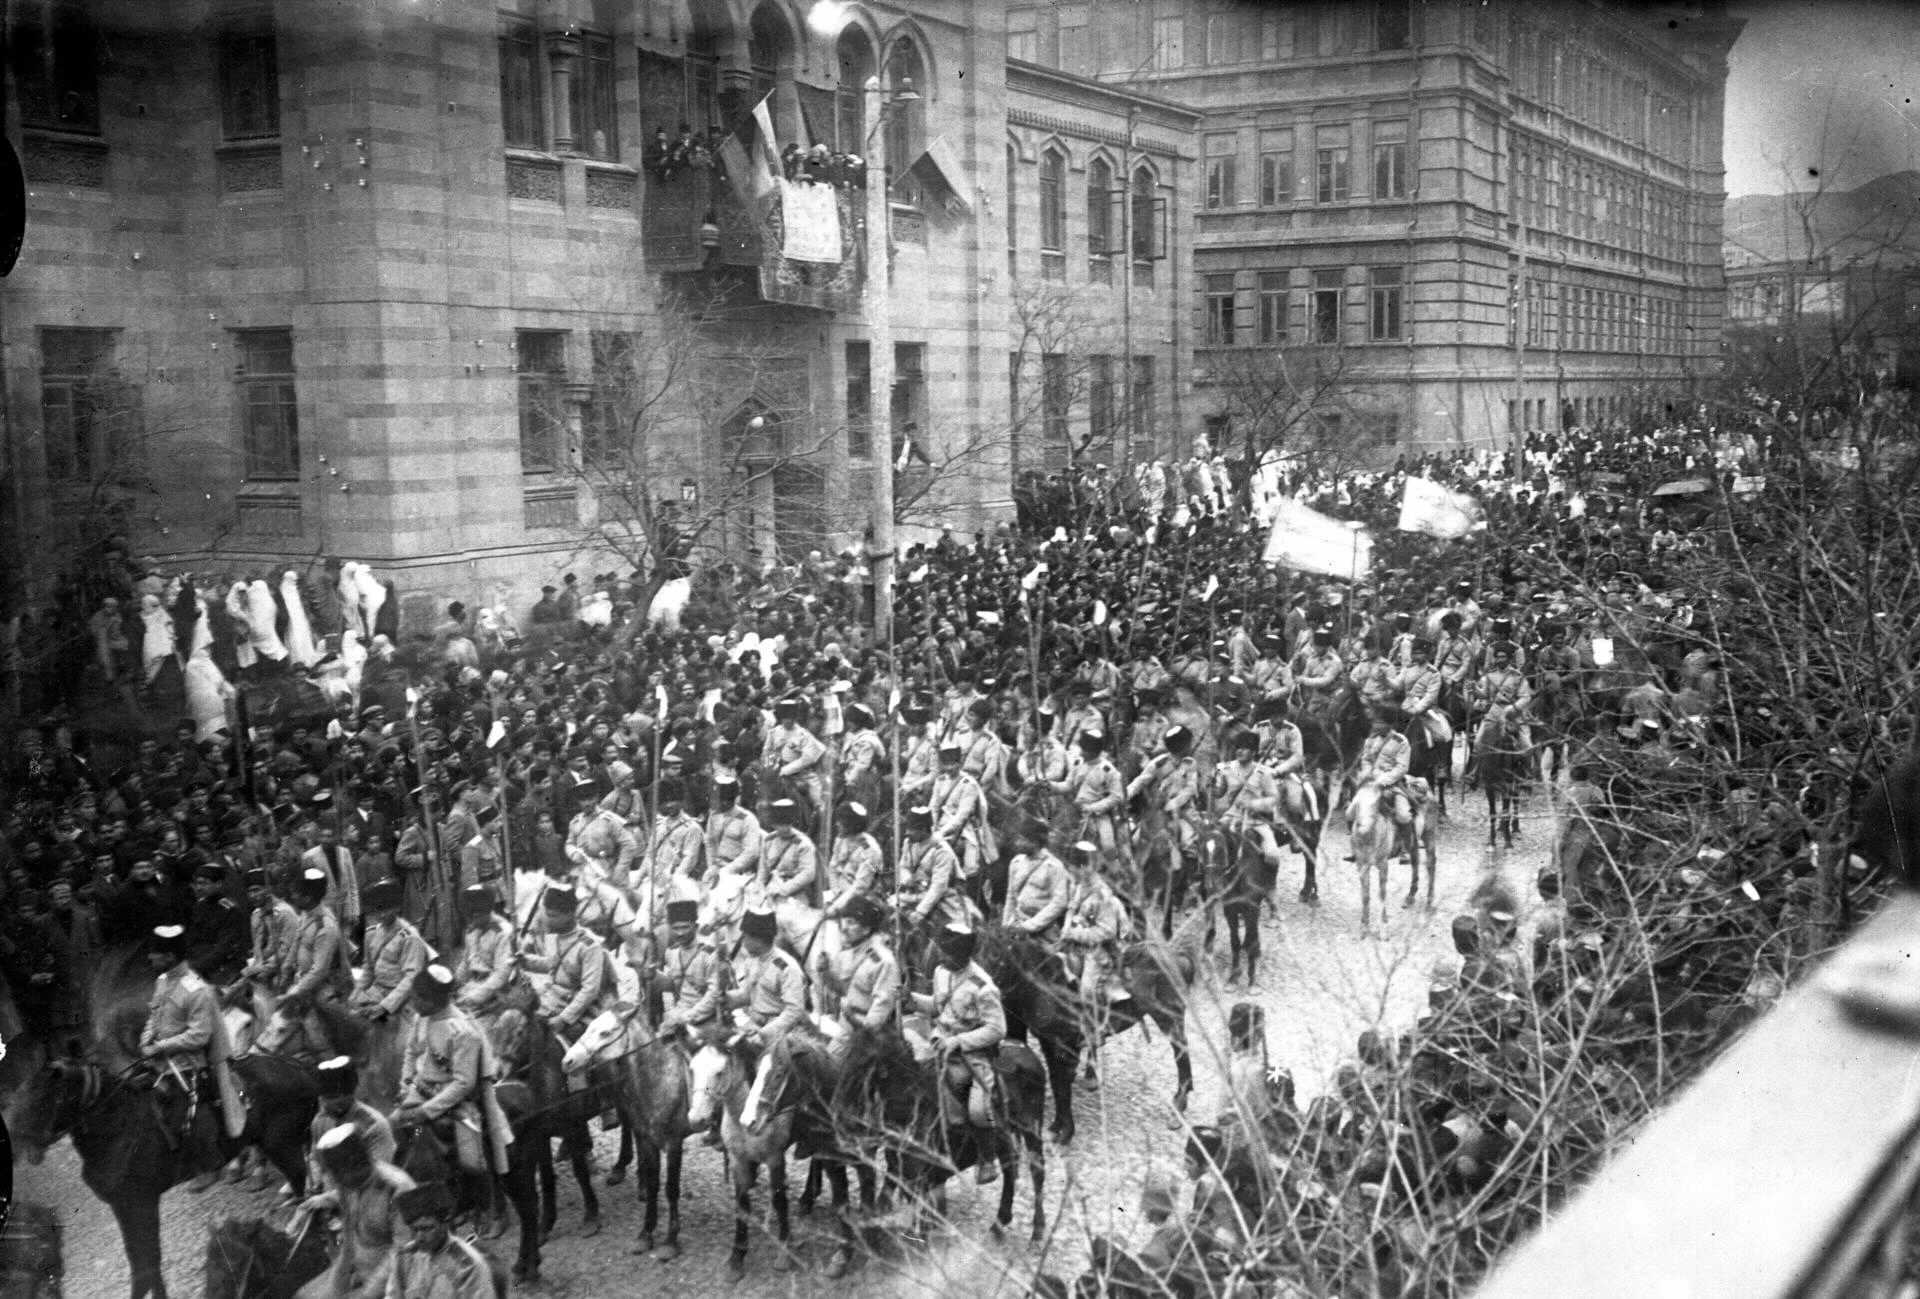 The Ottoman Islamic Army of the Caucasus enters Baku on 15 September, 1918